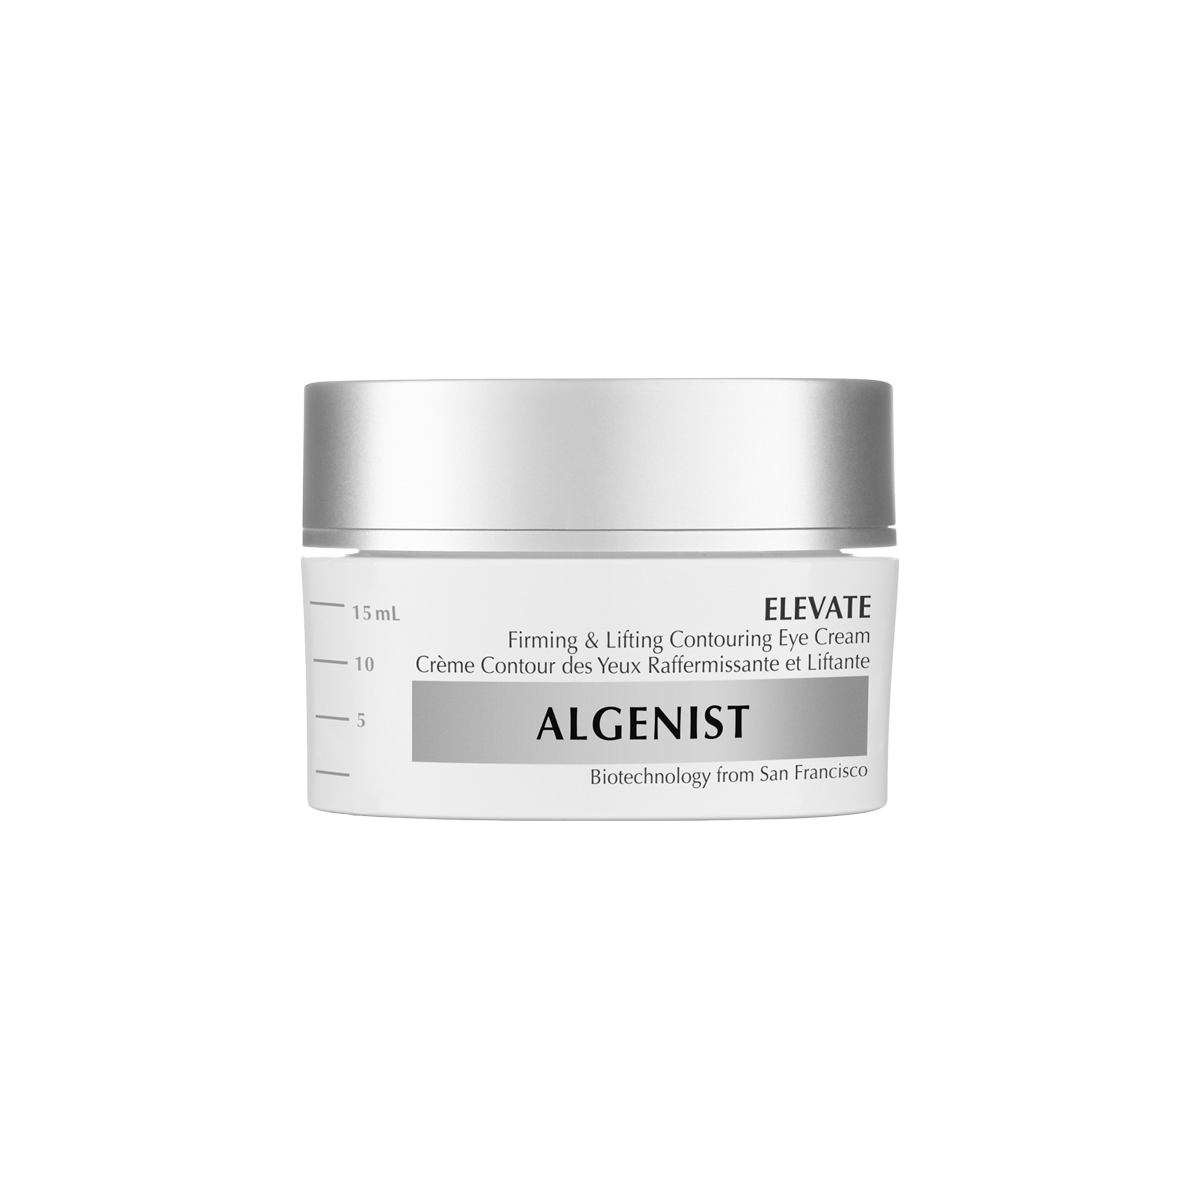 Algenist - Elevate Firming and Lifting Contouring Eye Cream